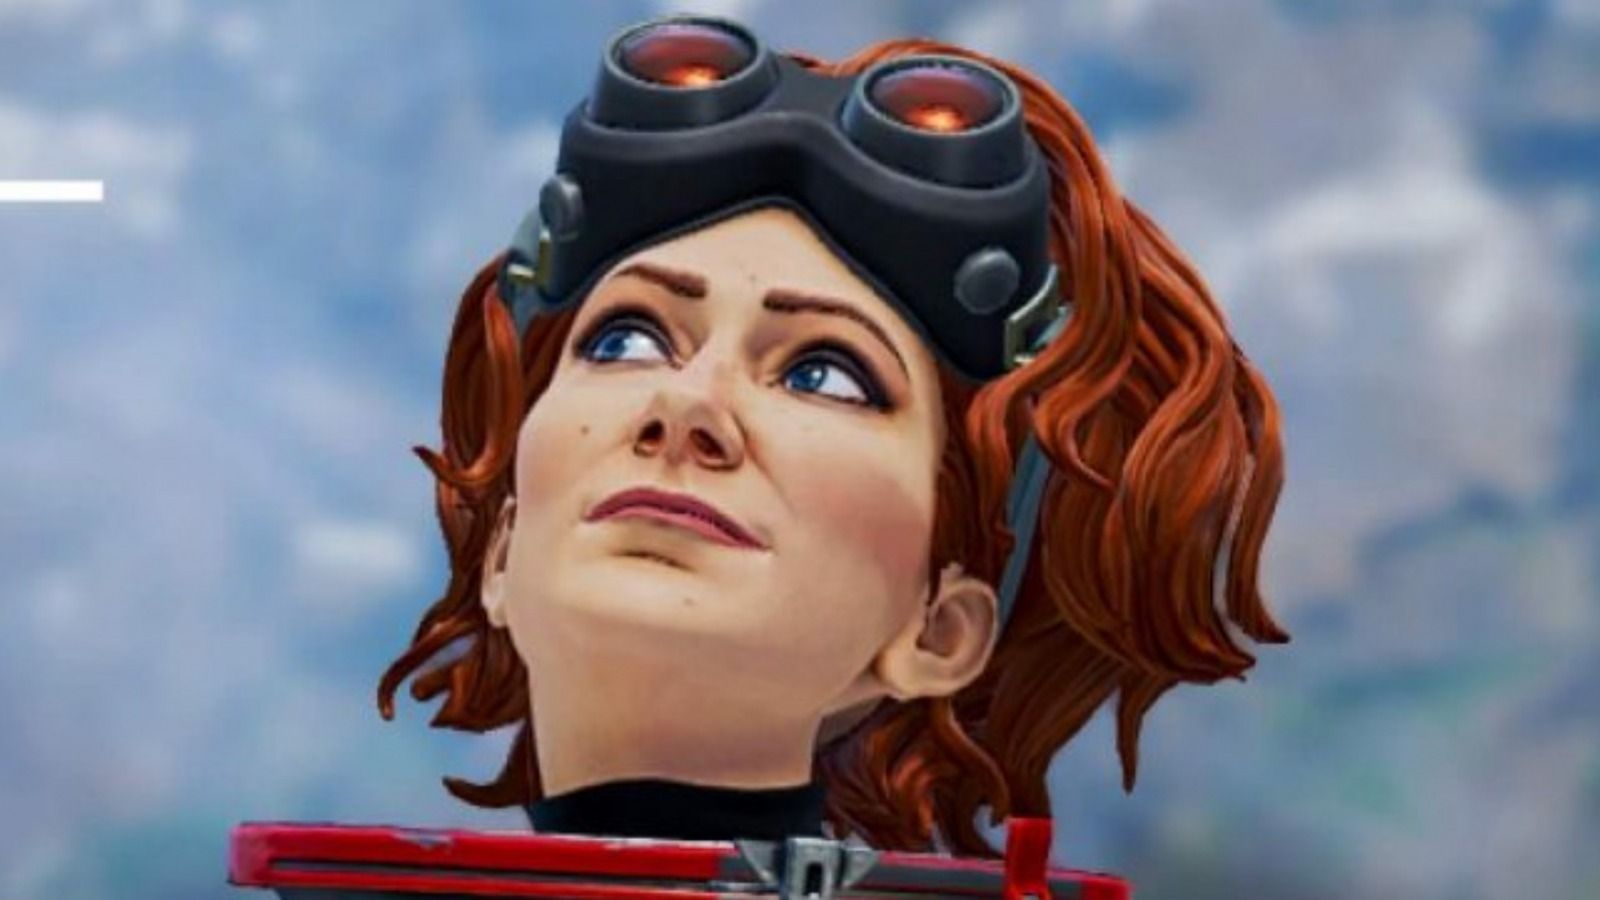 Everything you need to know about Apex Legends Season 7